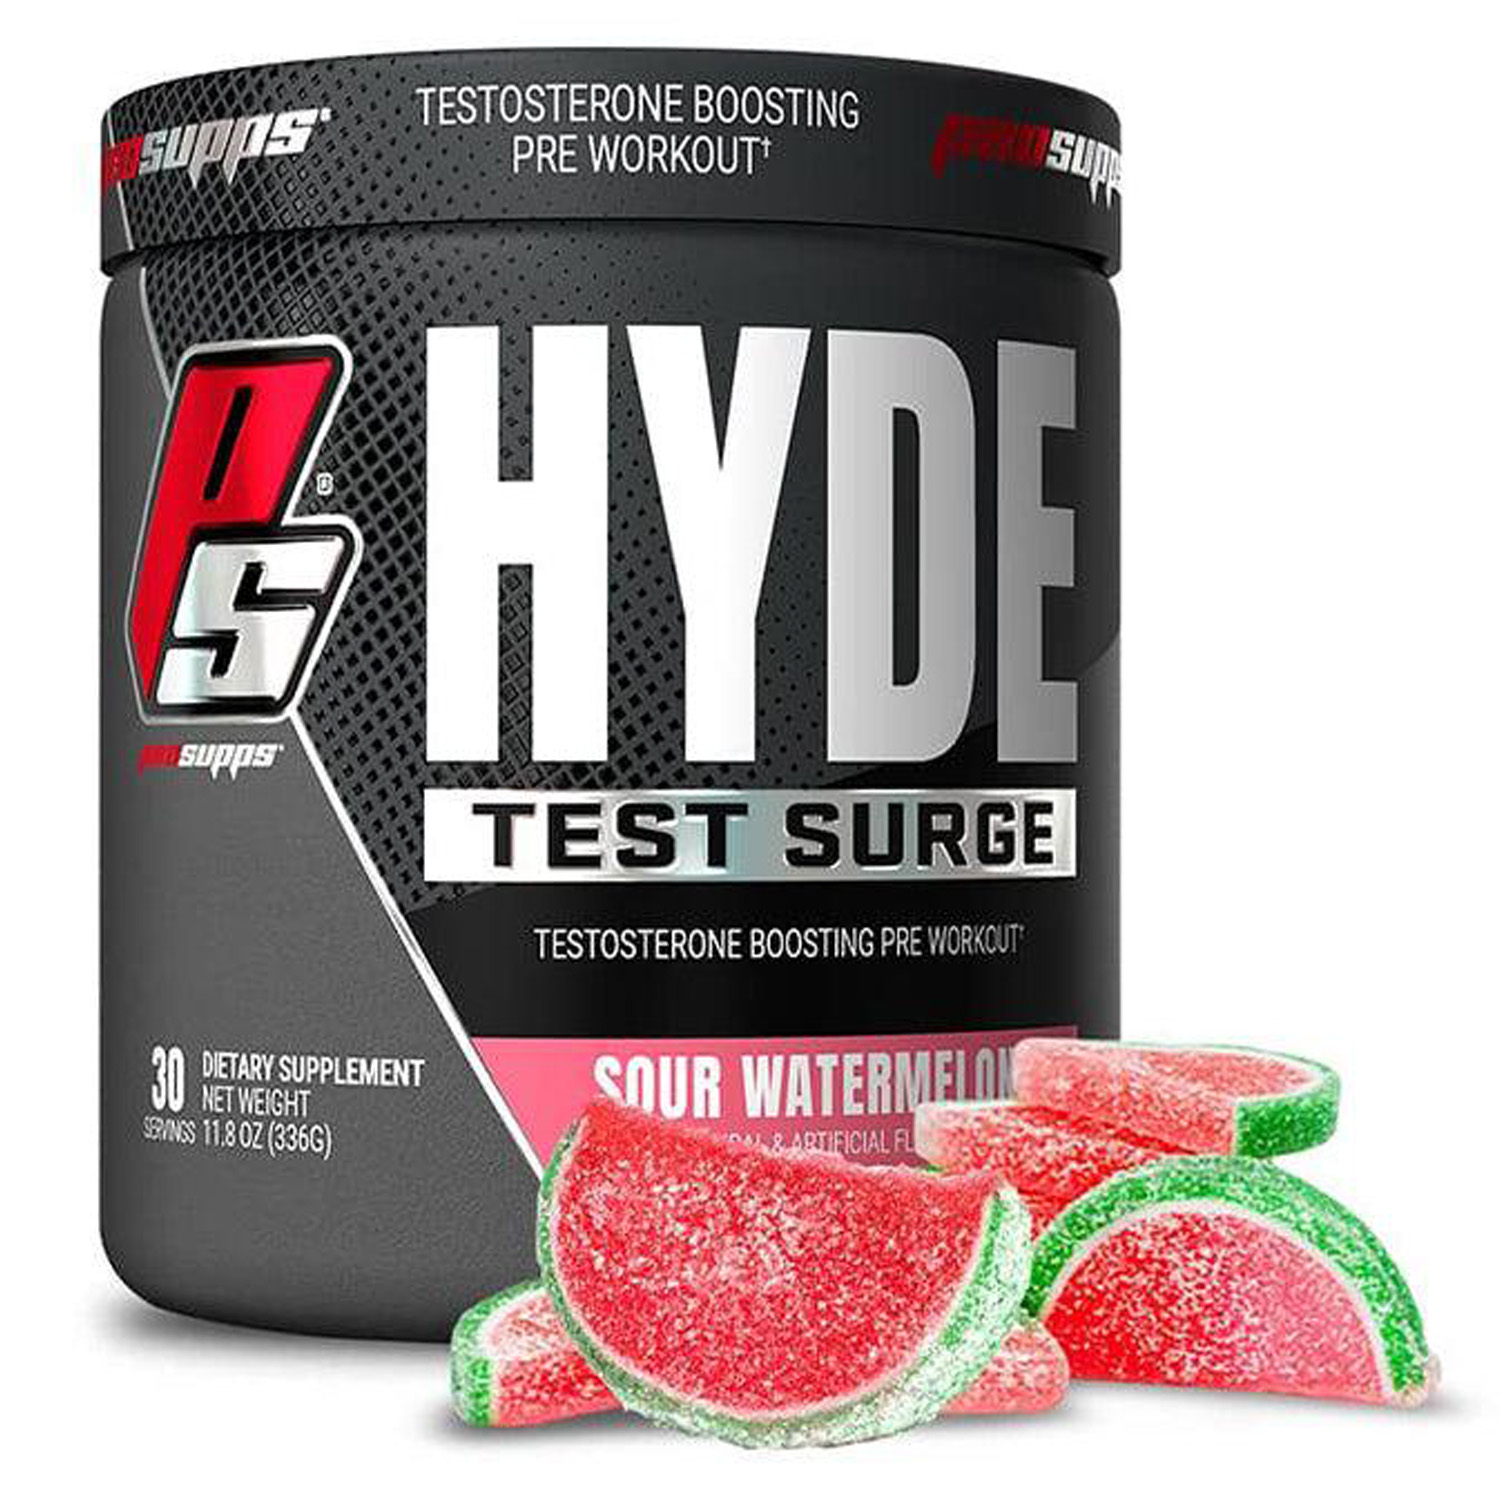 Pro Supps HYDE Test Surge, Watermelon, 30, Delivers Extreme Energy, Maximizes Power Output